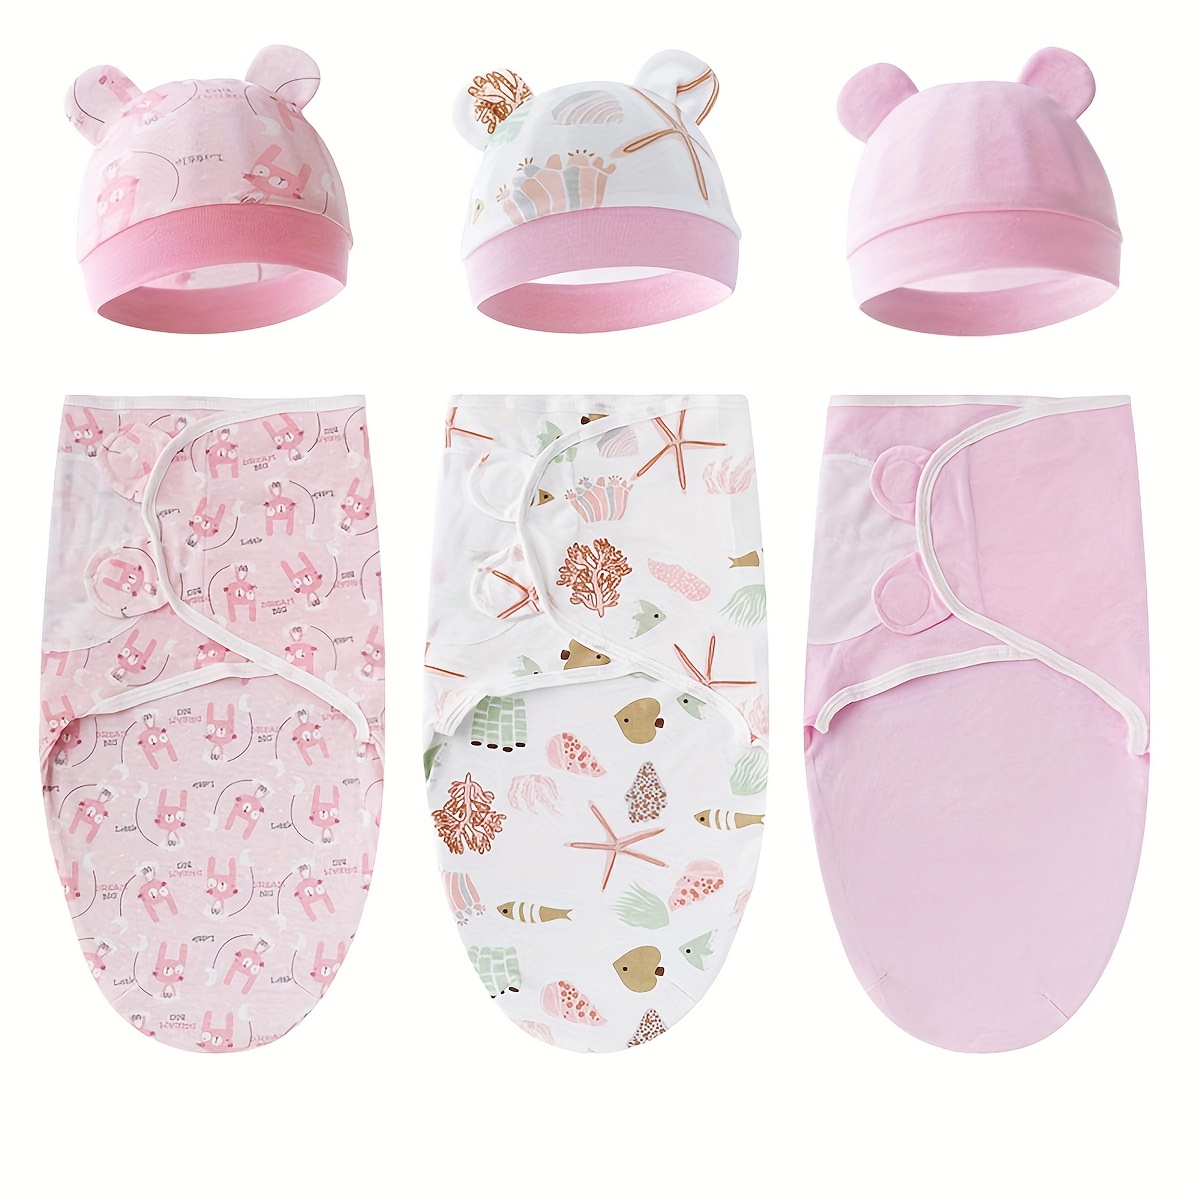 

Snuggle Up In Comfort: Newborn Sleeping Bag, Baby Anti-kick Quilt, Maternity Room Wrap Towel & Swaddle Blanket With Hat